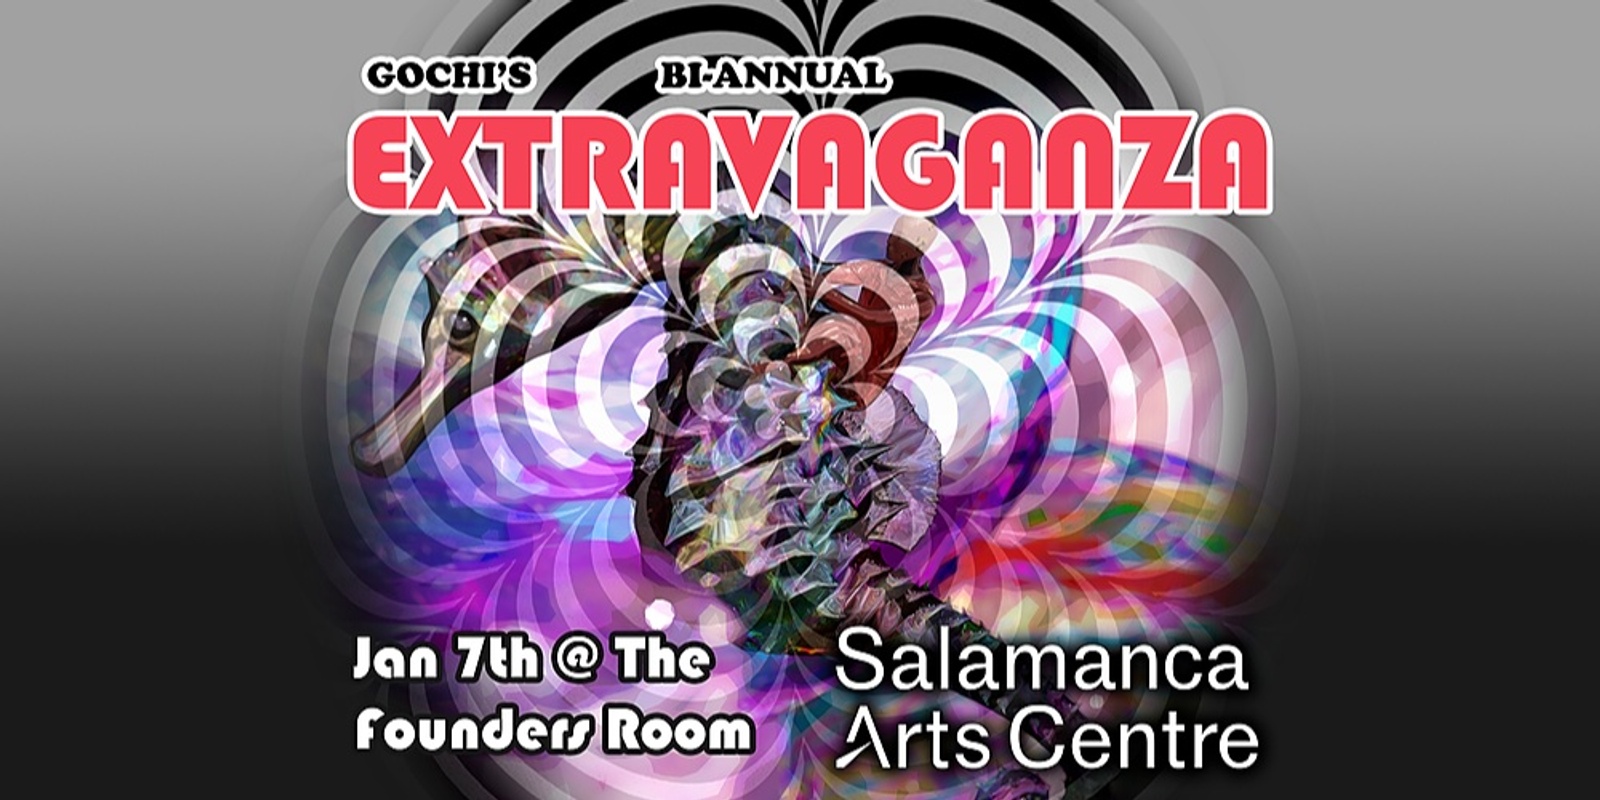 Banner image for Mr Gochi's 2nd Biannual Extravaganza live at The Founders